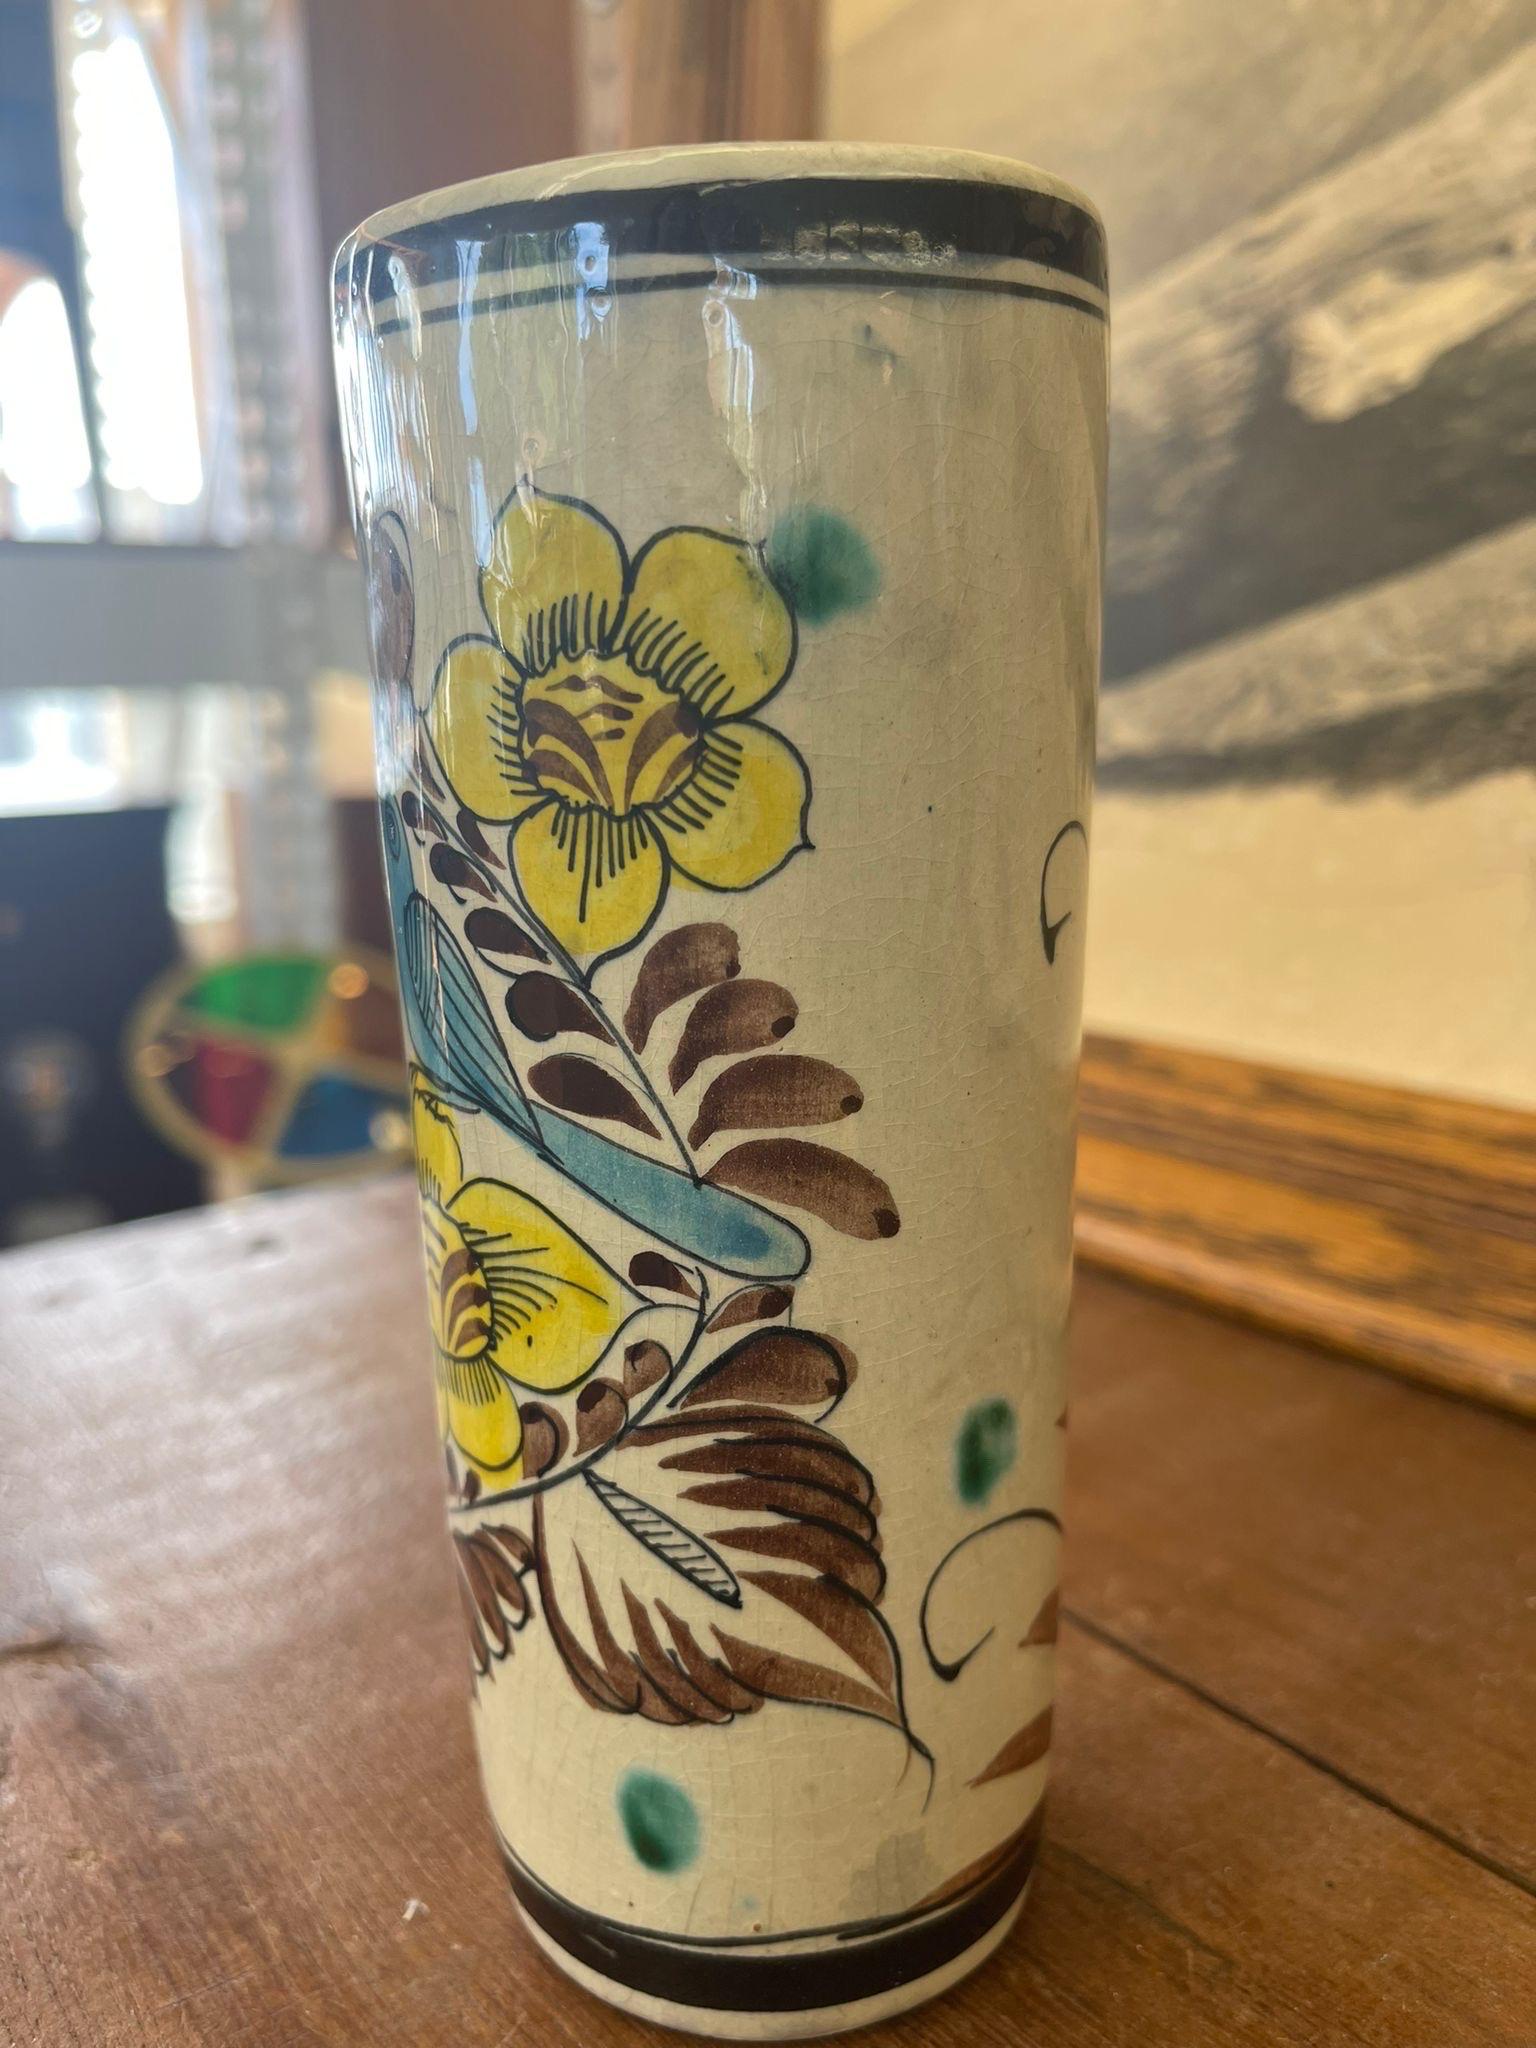 Antique Style Vase with Blue , Yellow Bird and Flower Motif. Opposite Side of the Vase Has a Leaf as Pictured. Wear and Tear Consistent with Age.

Dimensions. 3 W ; 3 D ; 7 H